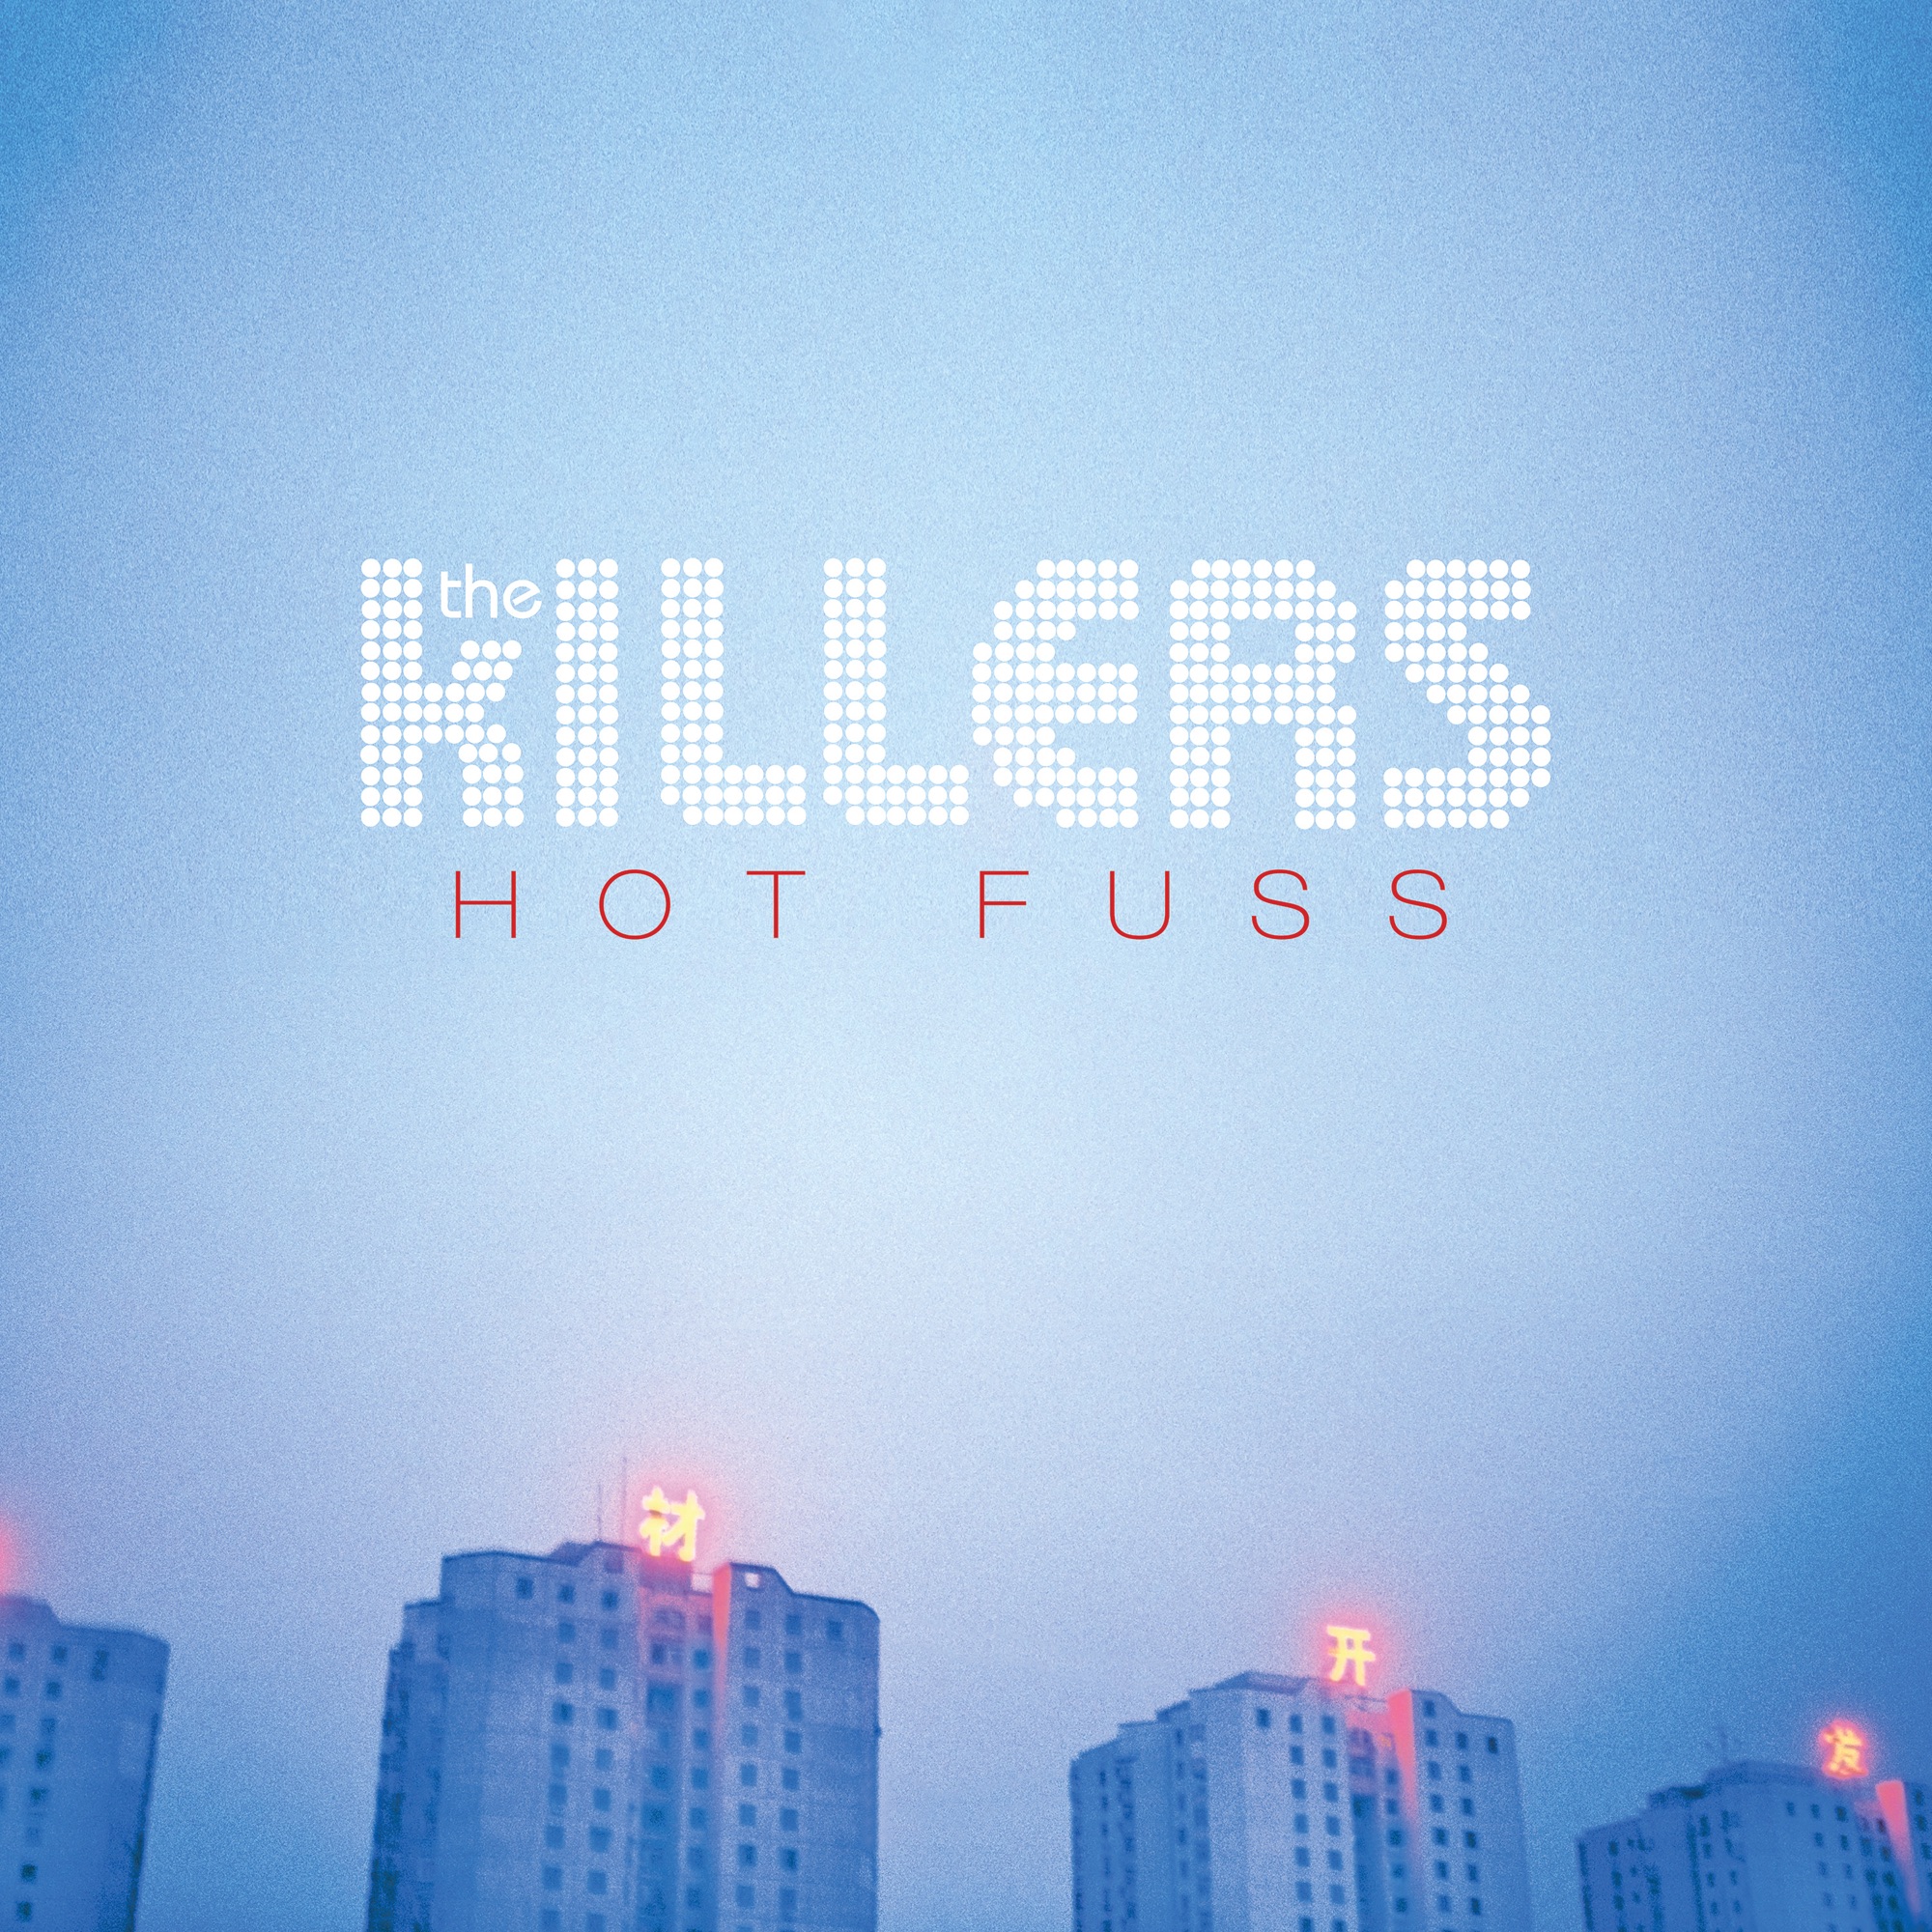 Art for Mr. Brightside by The Killers